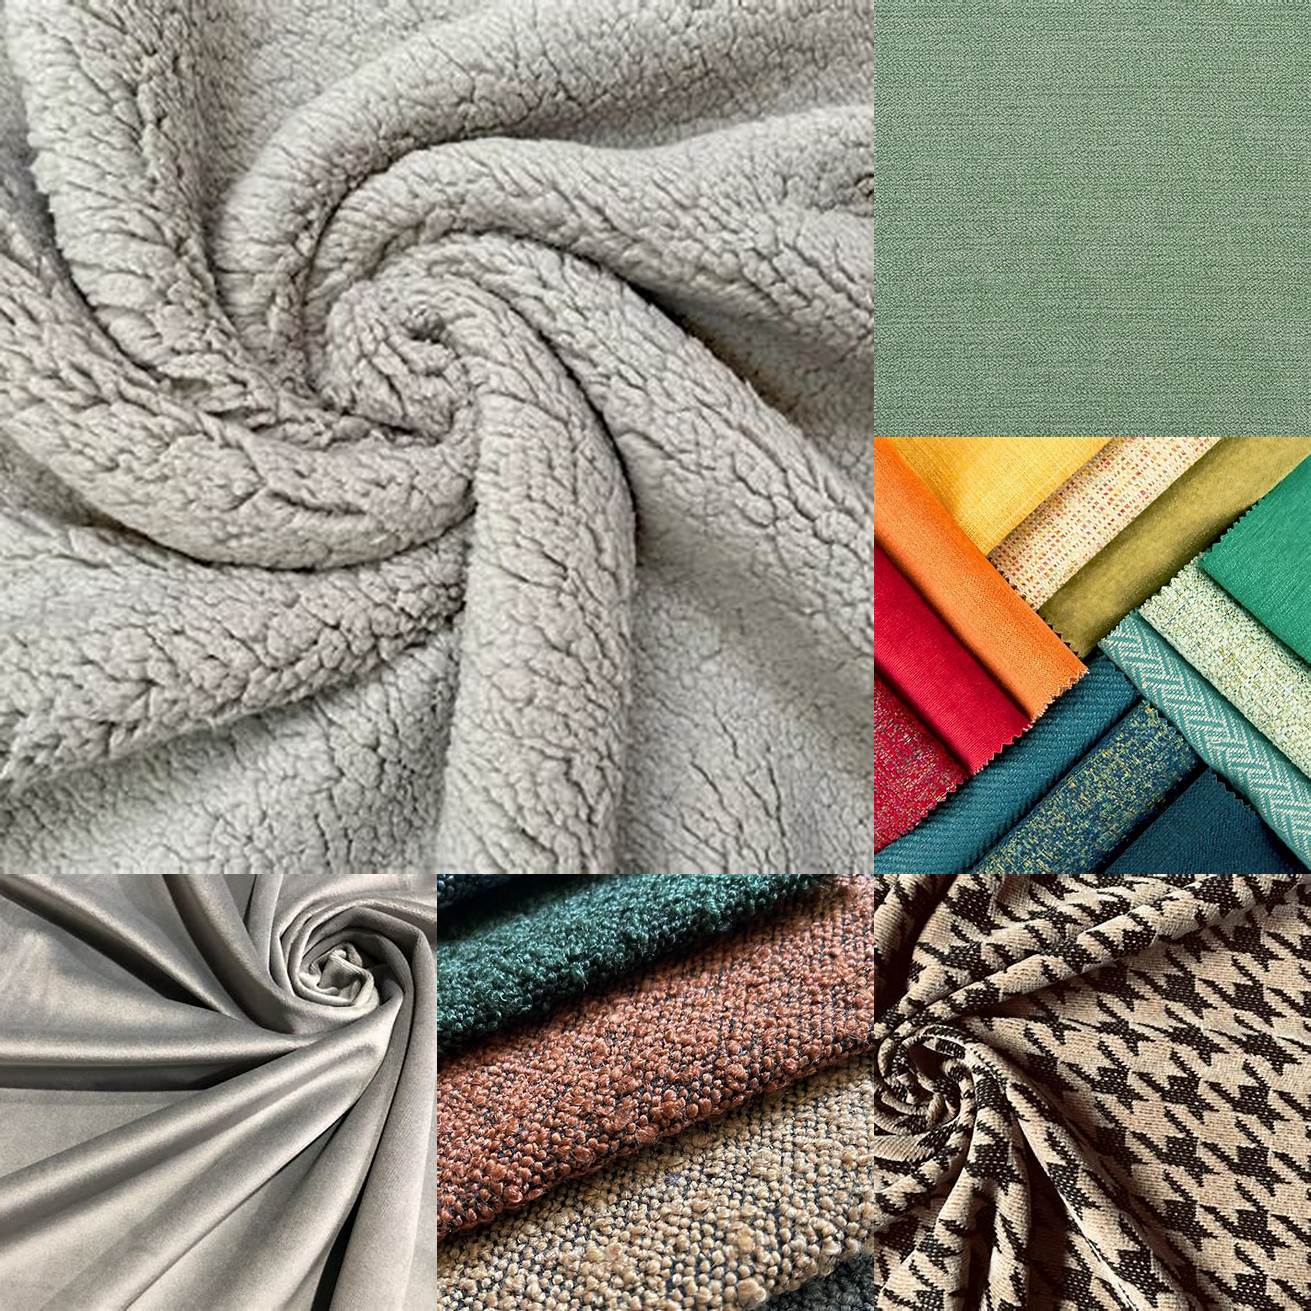 Fabric - Fabric upholstery is soft and comfortable and comes in a wide range of colors and patterns